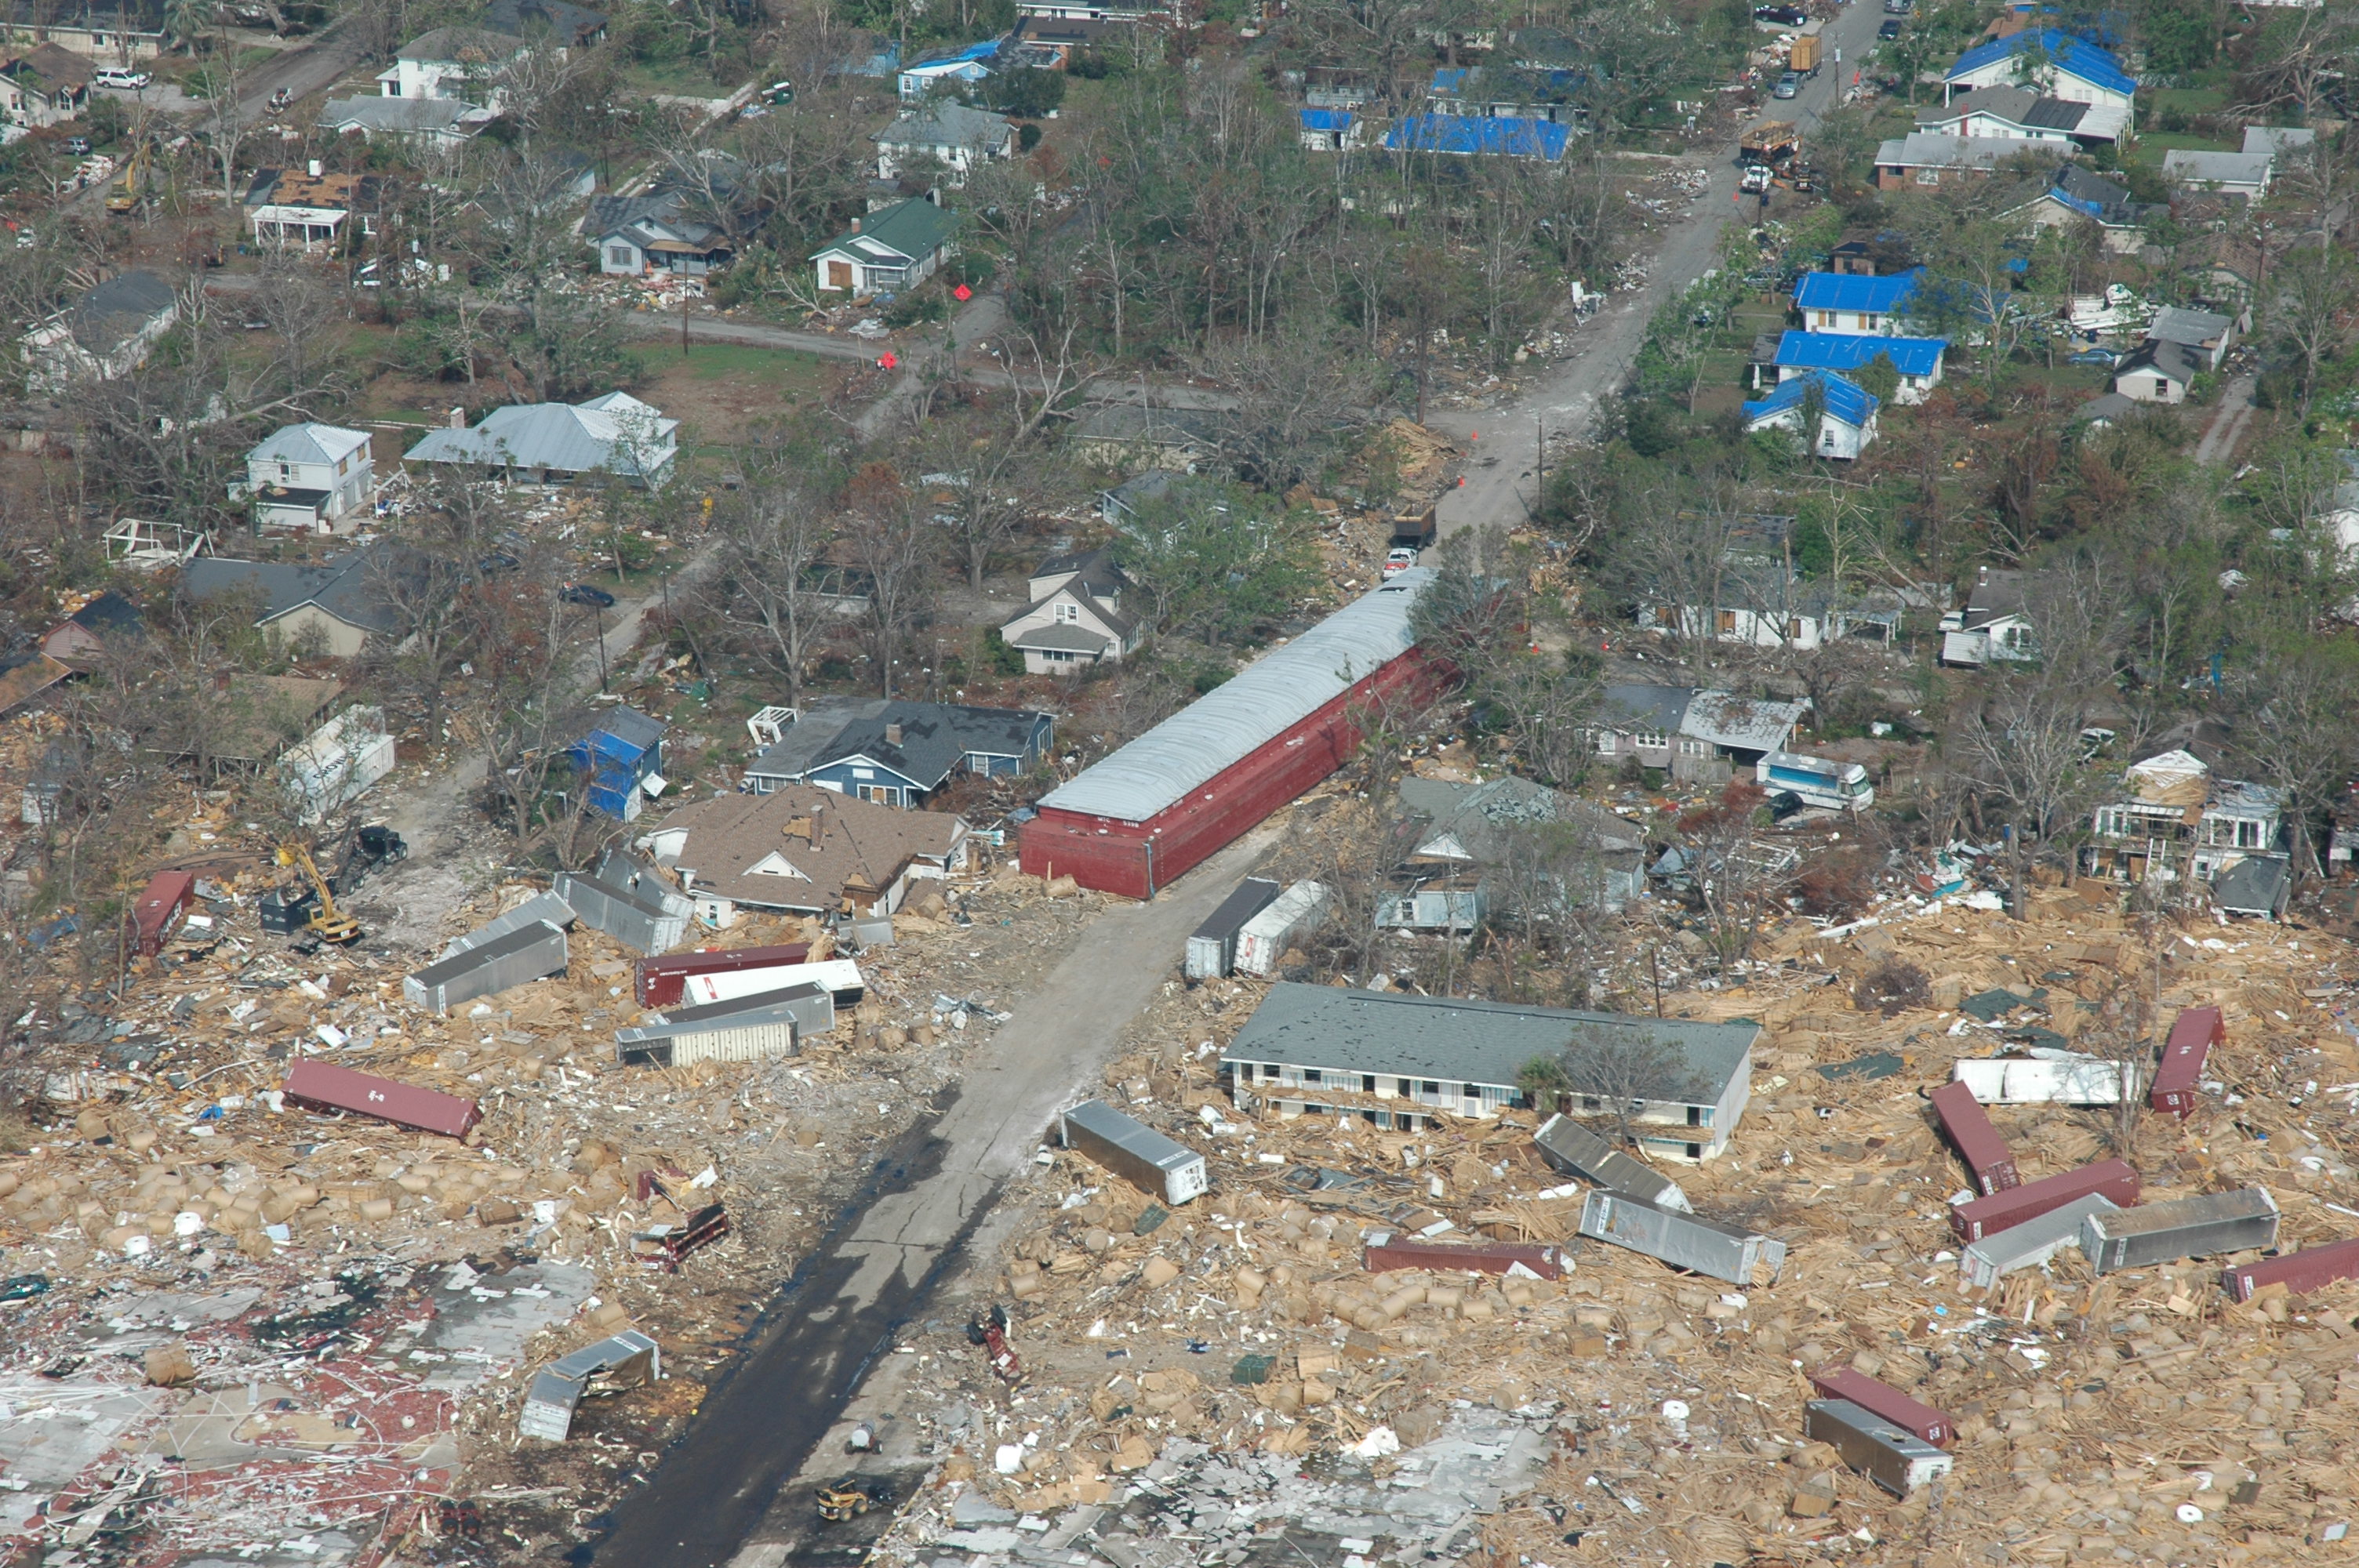 FEMA - 16855 - Photograph by Marty Bahamonde taken on 09-30-2005 in Mississippi